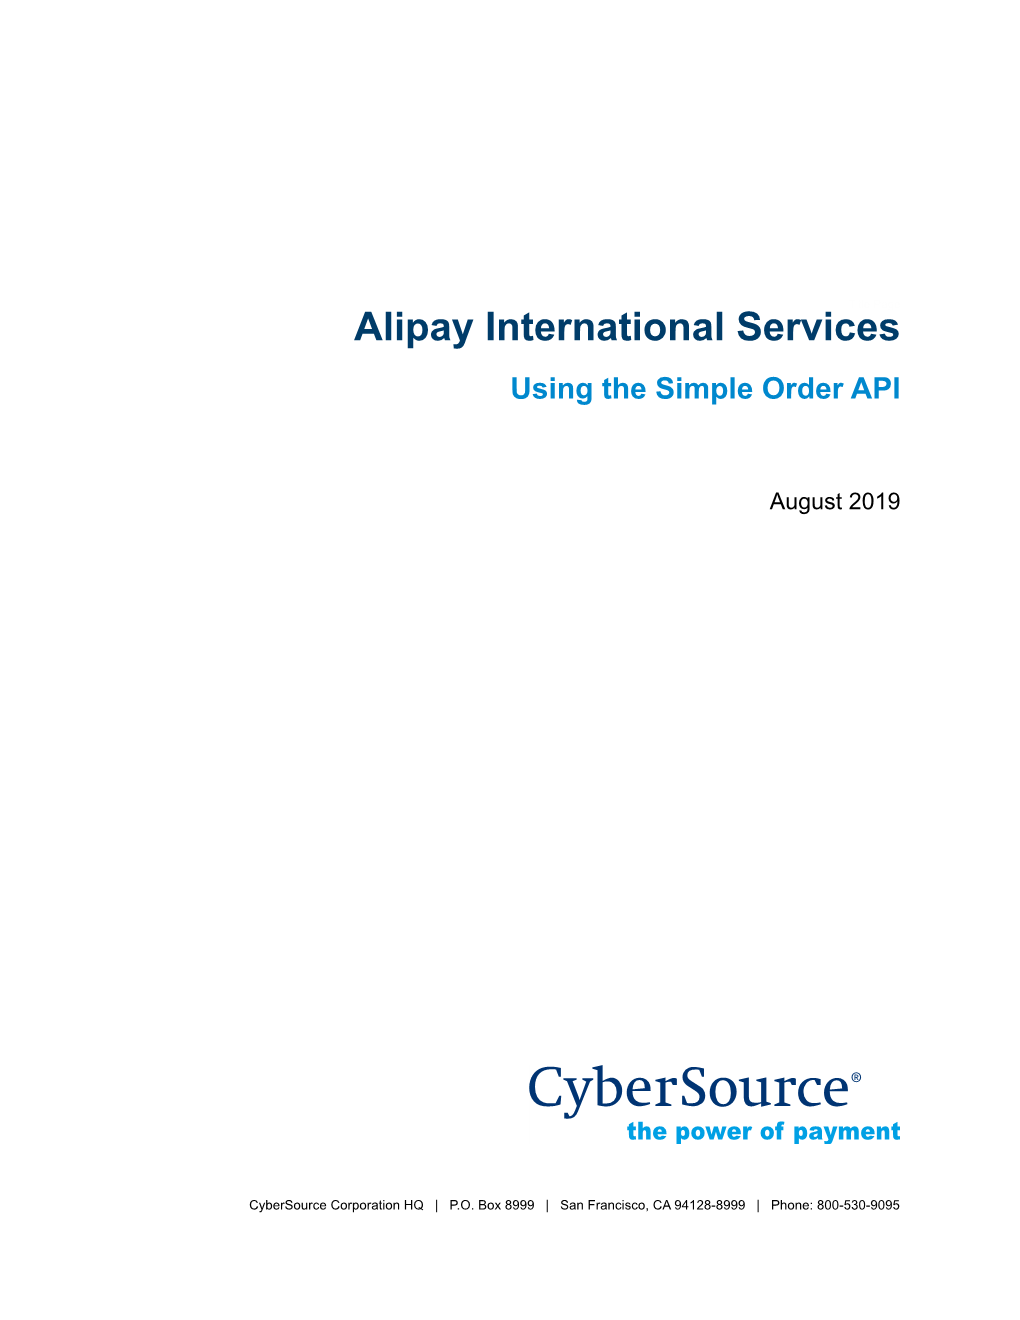 Alipay International Services Using the Simple Order API